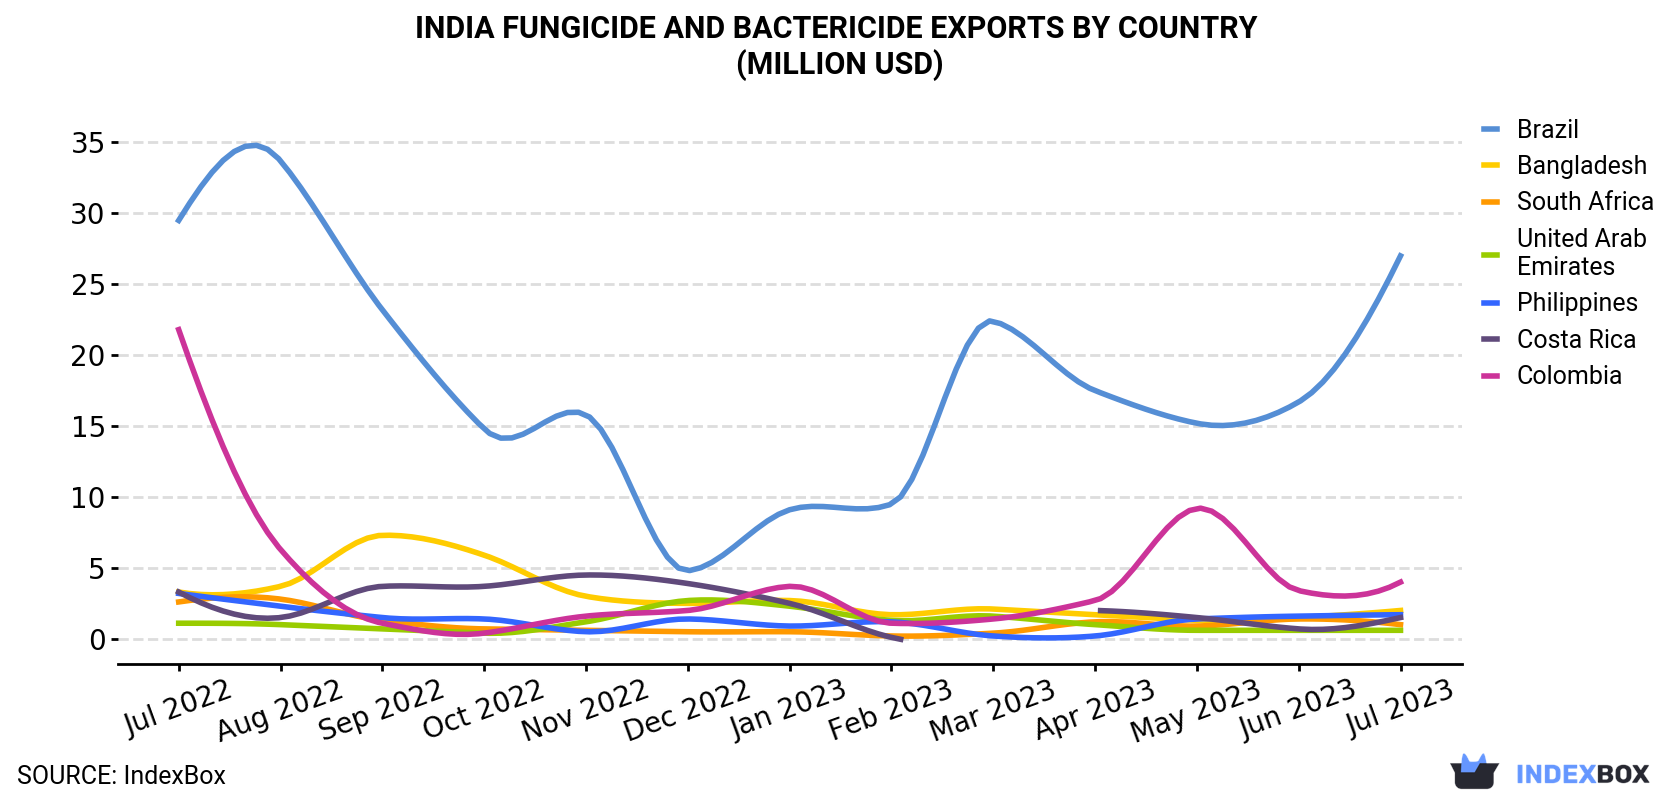 India Fungicide And Bactericide Exports By Country (Million USD)